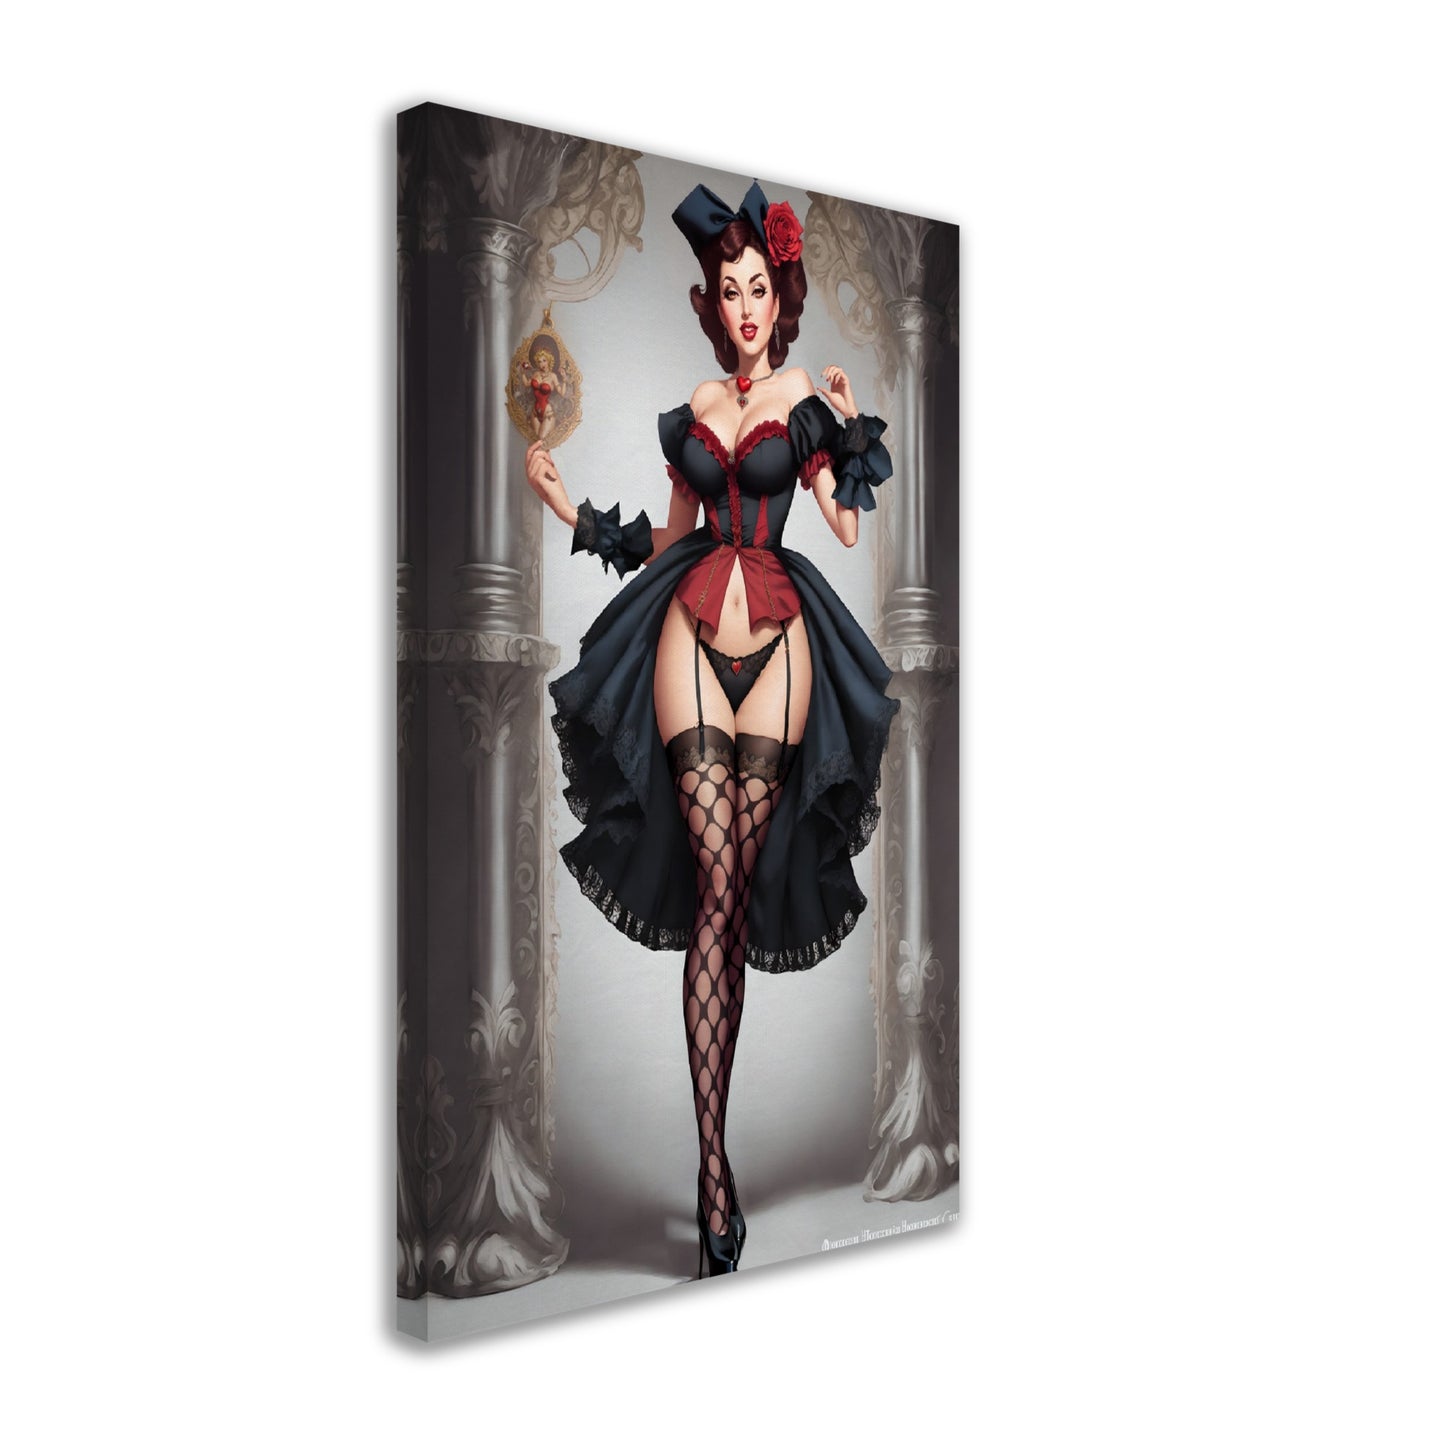 Daily Pinup #22 - Queen of Hearts Wall Art